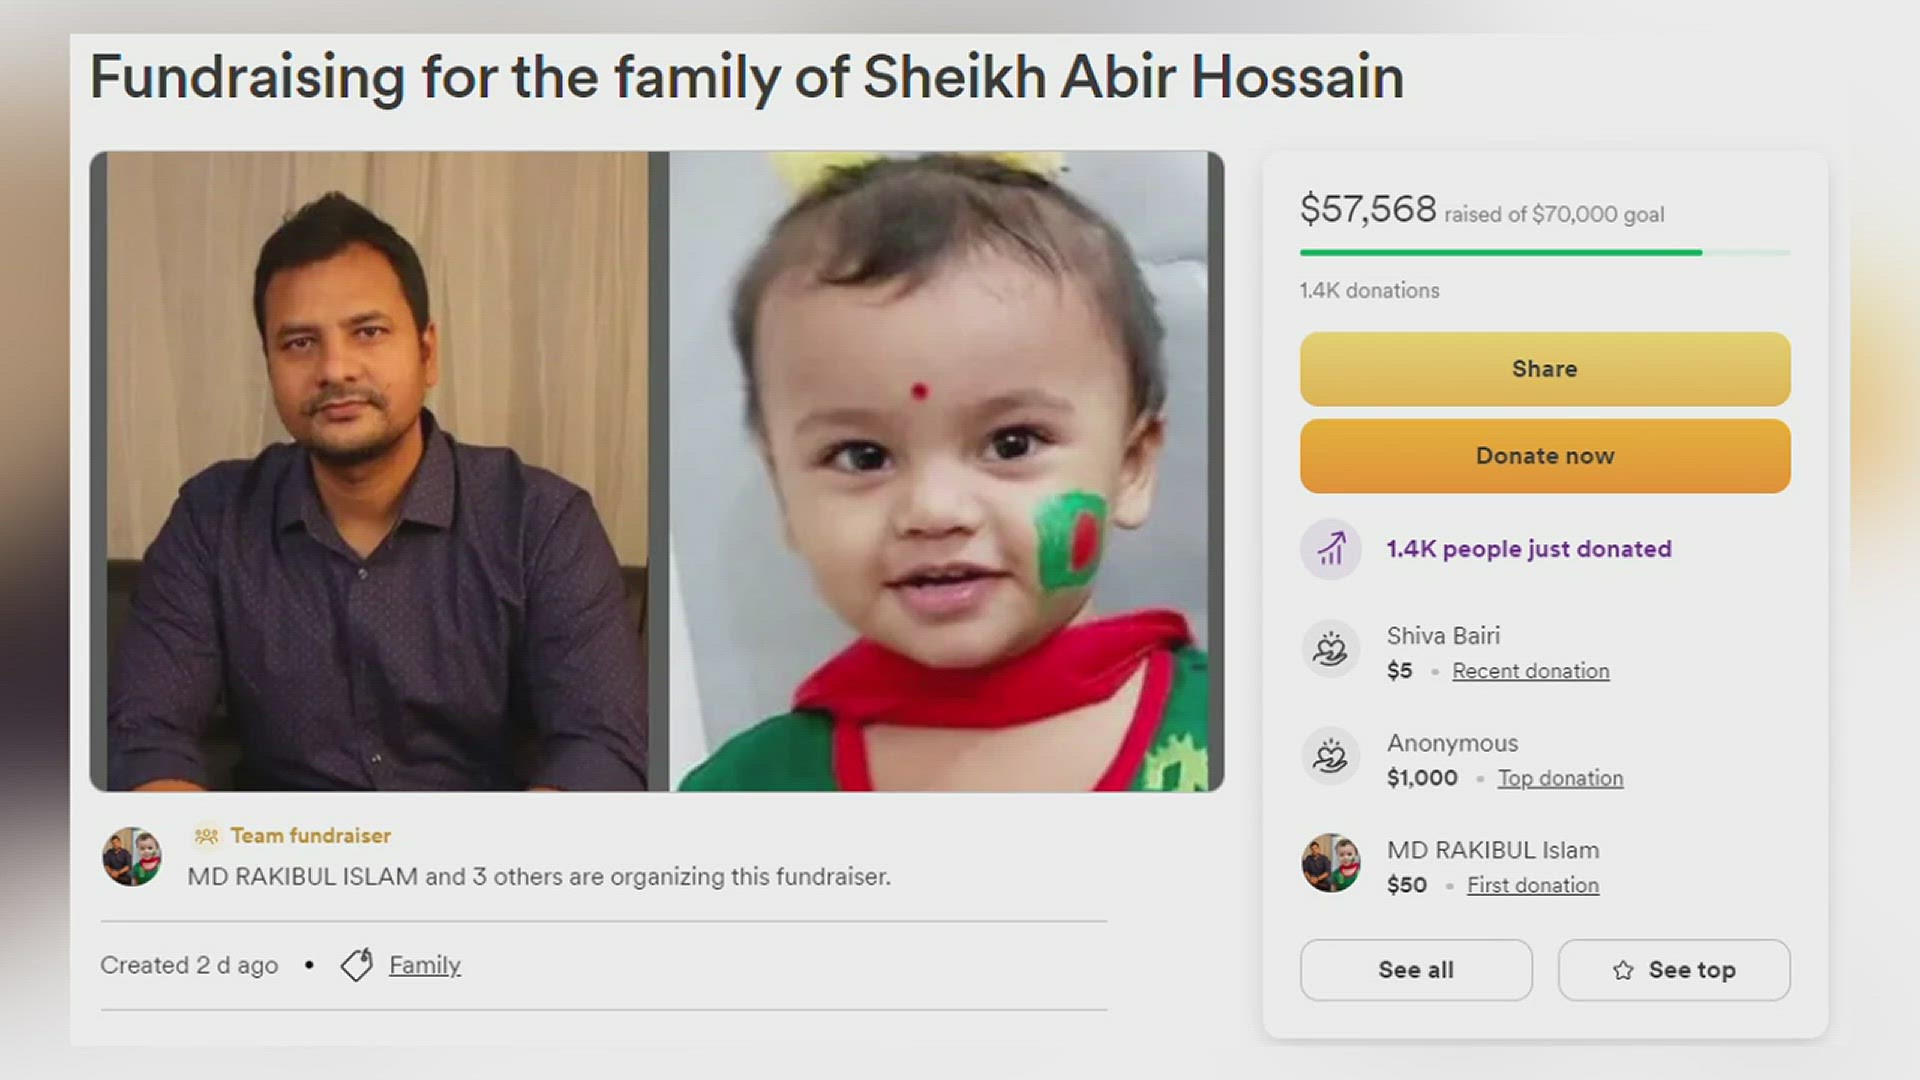 In a GoFundMe organized by the Bangladesh Student Association at Lamar University, it is said that Sheikh Abir-Hossain leaves behind a wife and 2-year-old daughter.